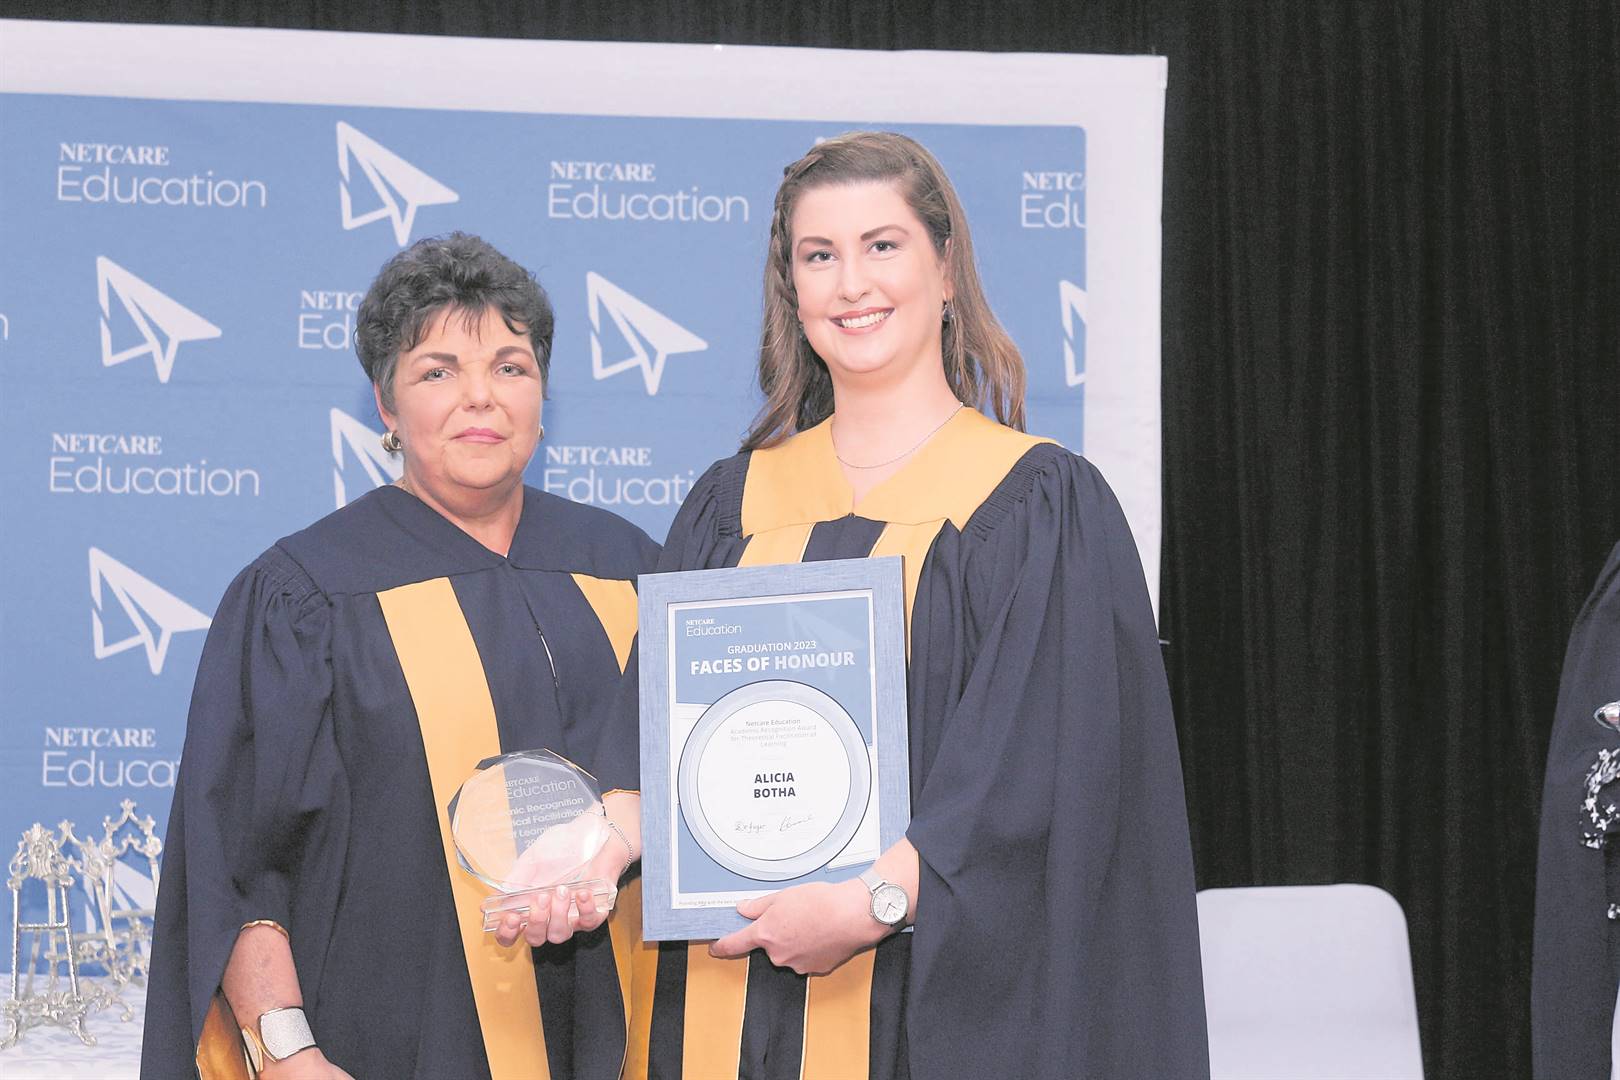 Toy Vermaak, manager Netcare Faculty of Nursing and Ancillary Healthcare, and Alicia Botha, campus based academic staff member and recipient of the Netcare Education Academic recognition Award for Theoretical Facilitation of Learning.